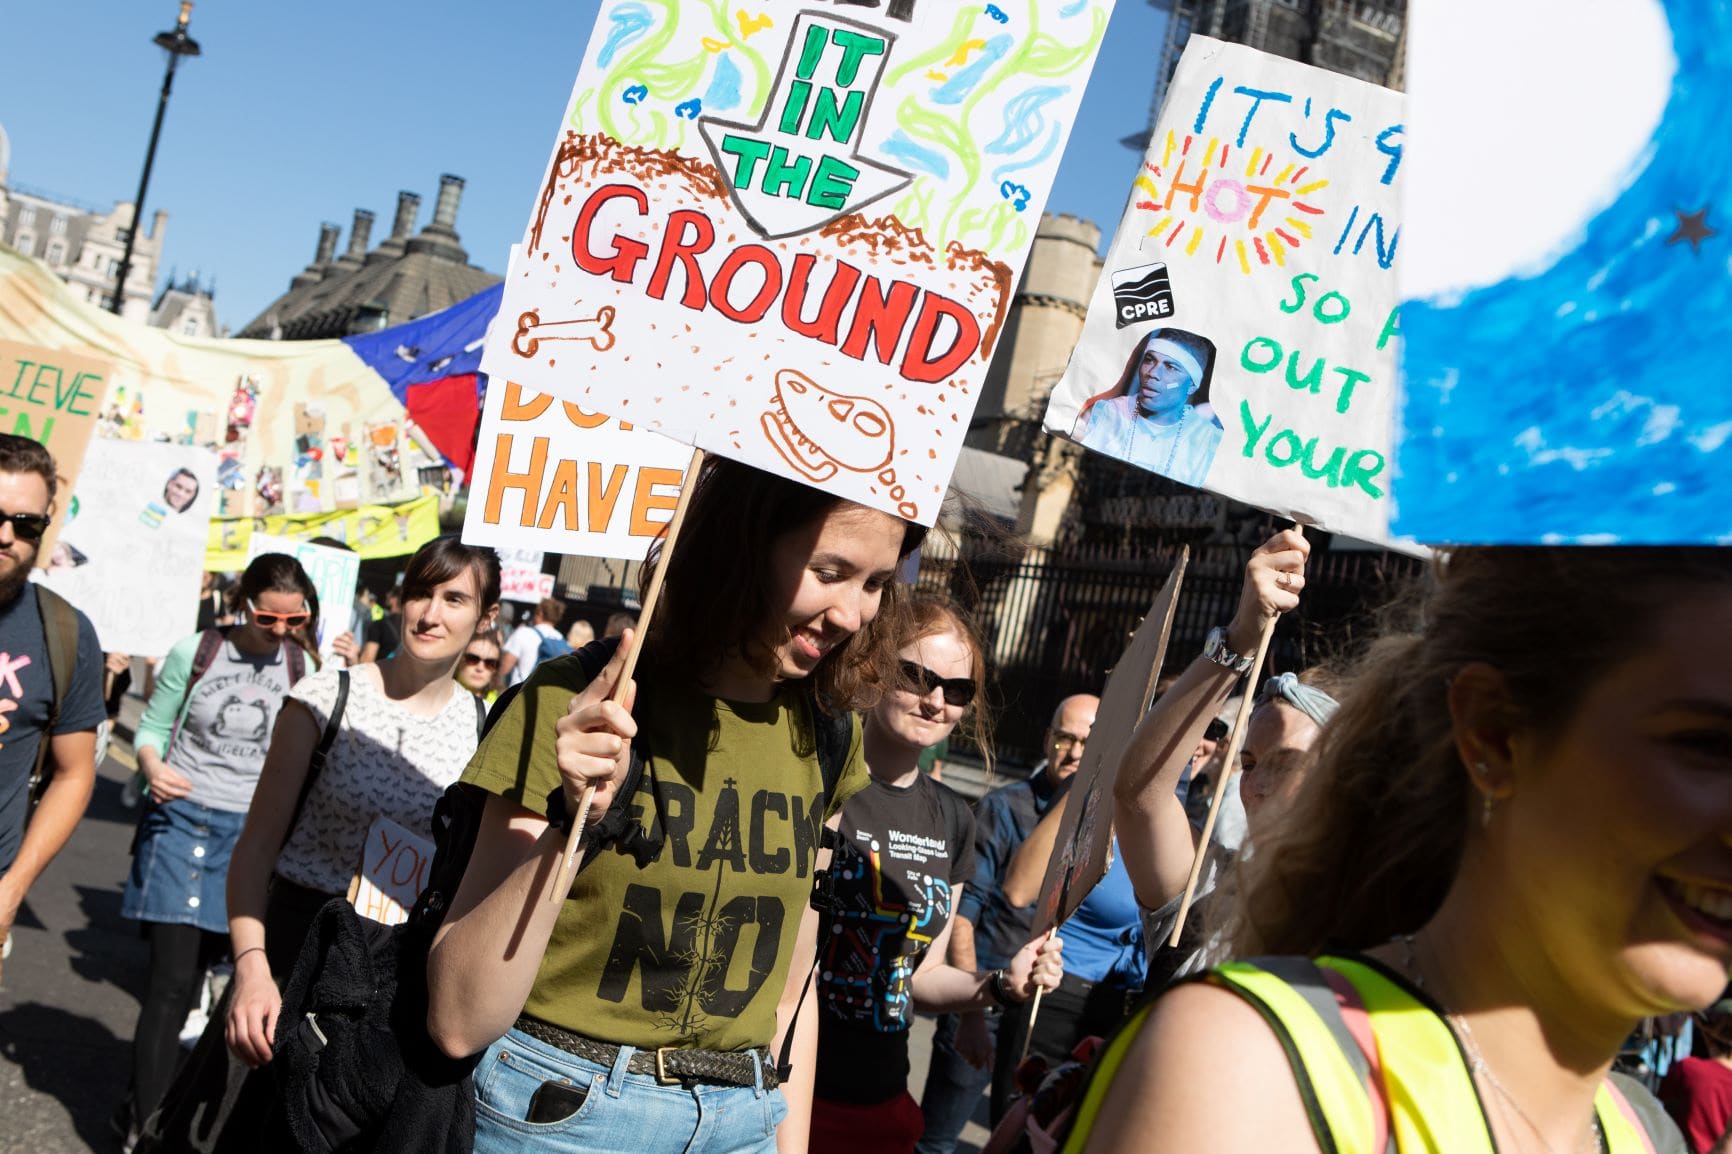 A young woman wearing a 'Frack No' t-shirt holds a banner in a protest march